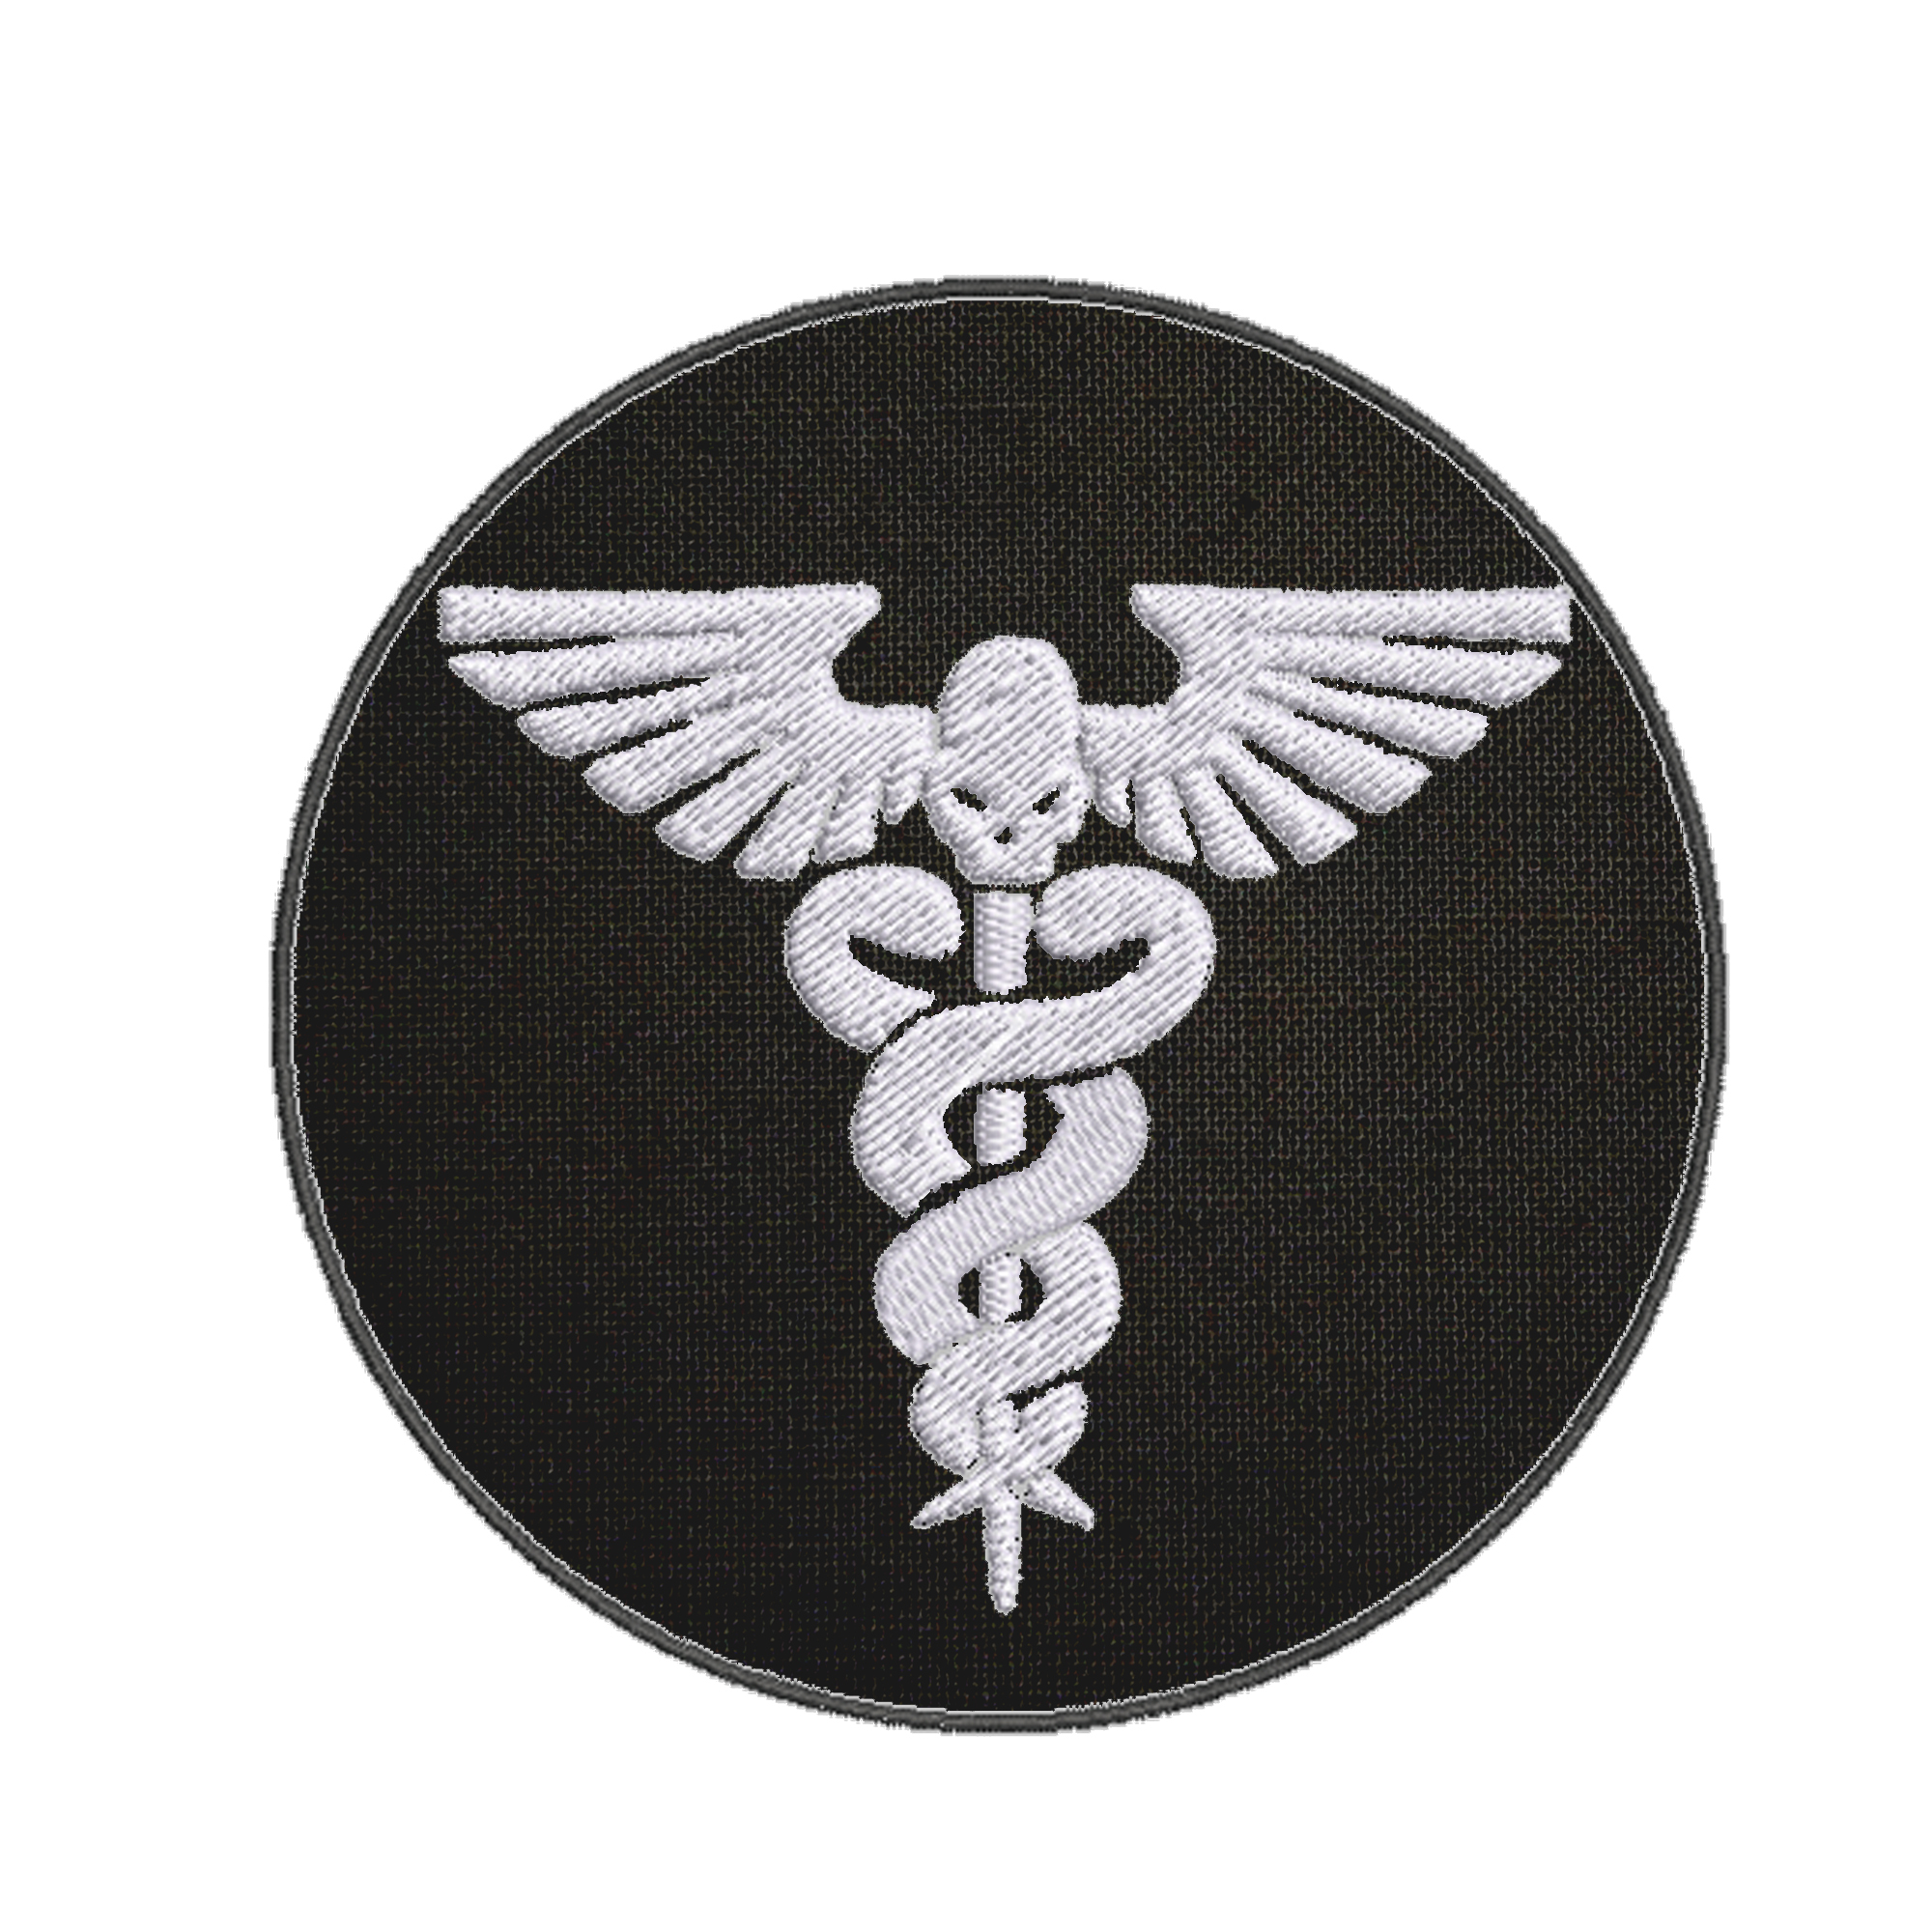 Apothecary Warhammer 40k Embroidered Patch Iron-On Applique, Cosplay Vest Clothing Badge Back Packs Uniform, Geeks & Gamers, Table Top, Anime, Cartoon, Grim Dark DIY - image 1 of 1